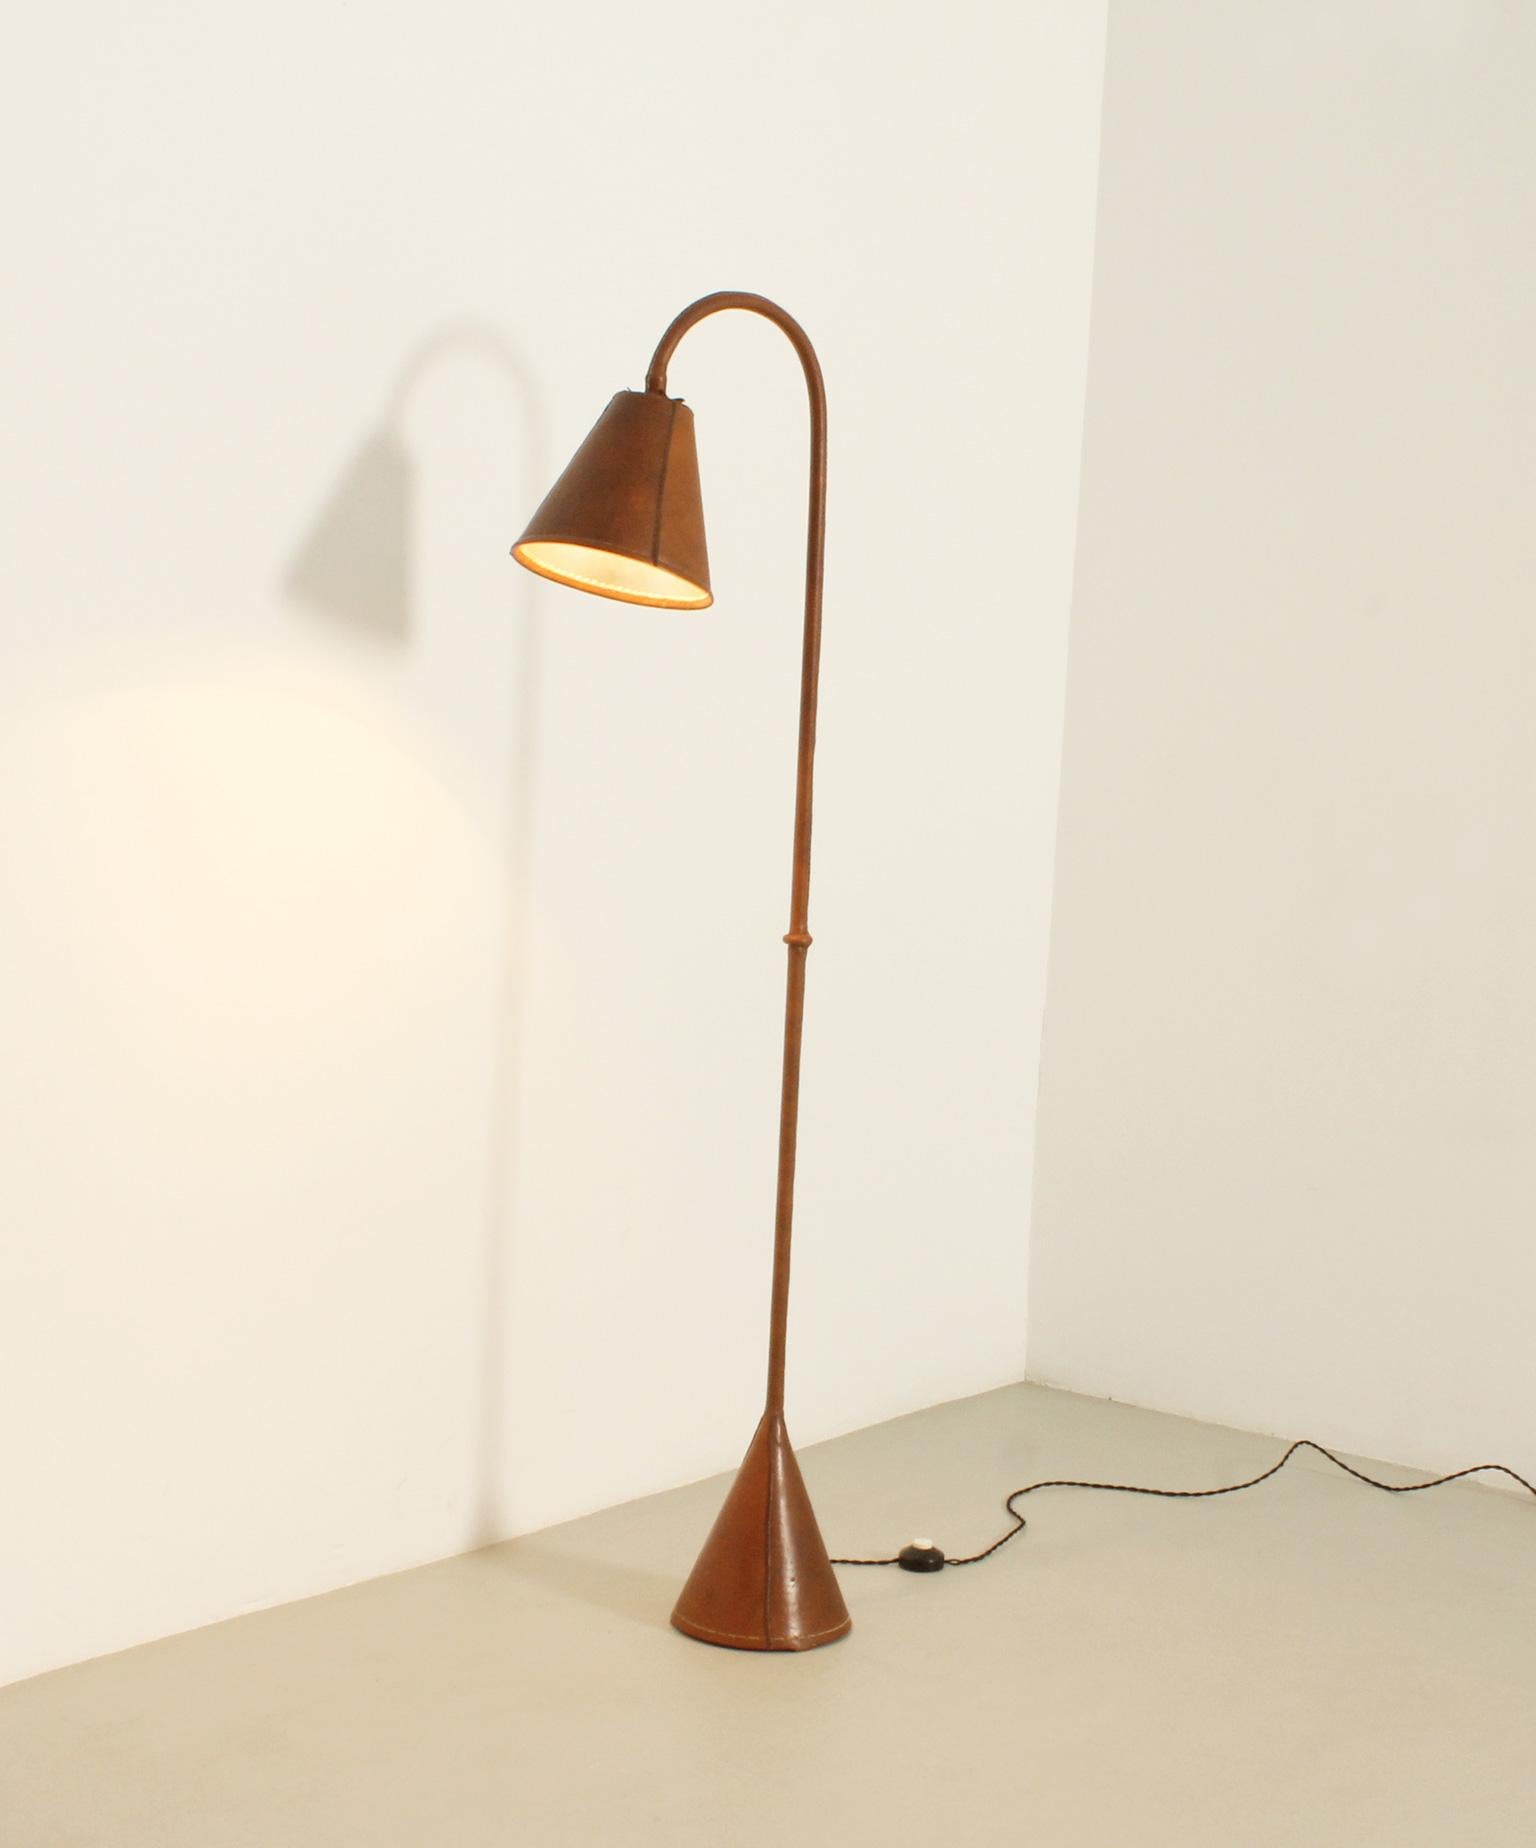 Floor Lamp by Valenti in Brown Leather, Spain, 1950's For Sale 8